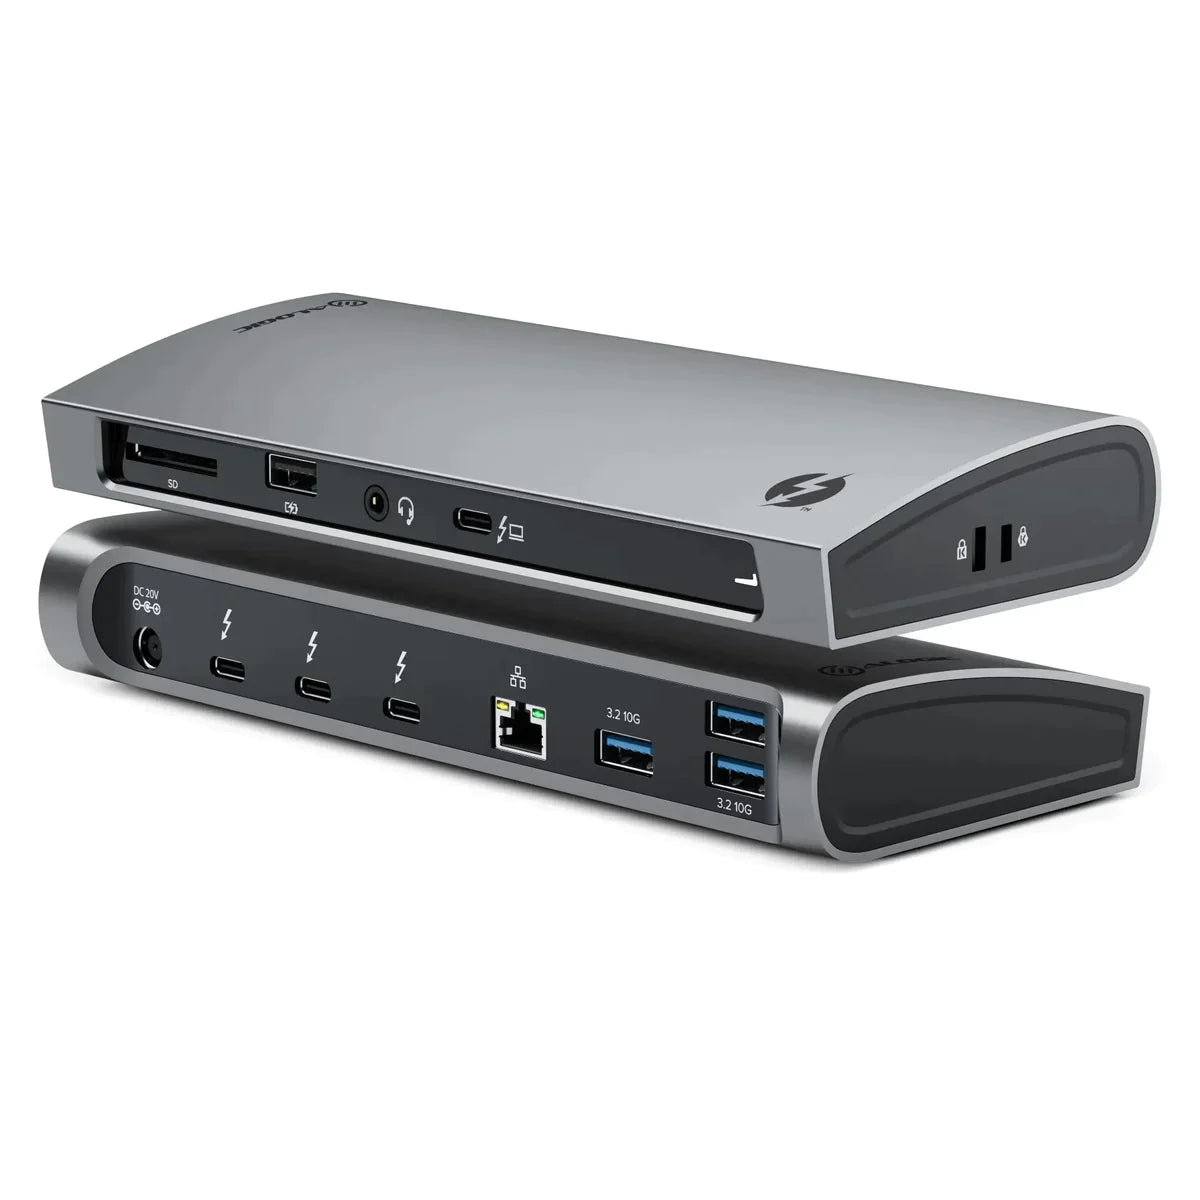 clarity-pro-touch-27-uhd-4k-monitor-with-65w-pd-webcam-and-touchscreen-thunderbolt-4-blaze-docking-station_2